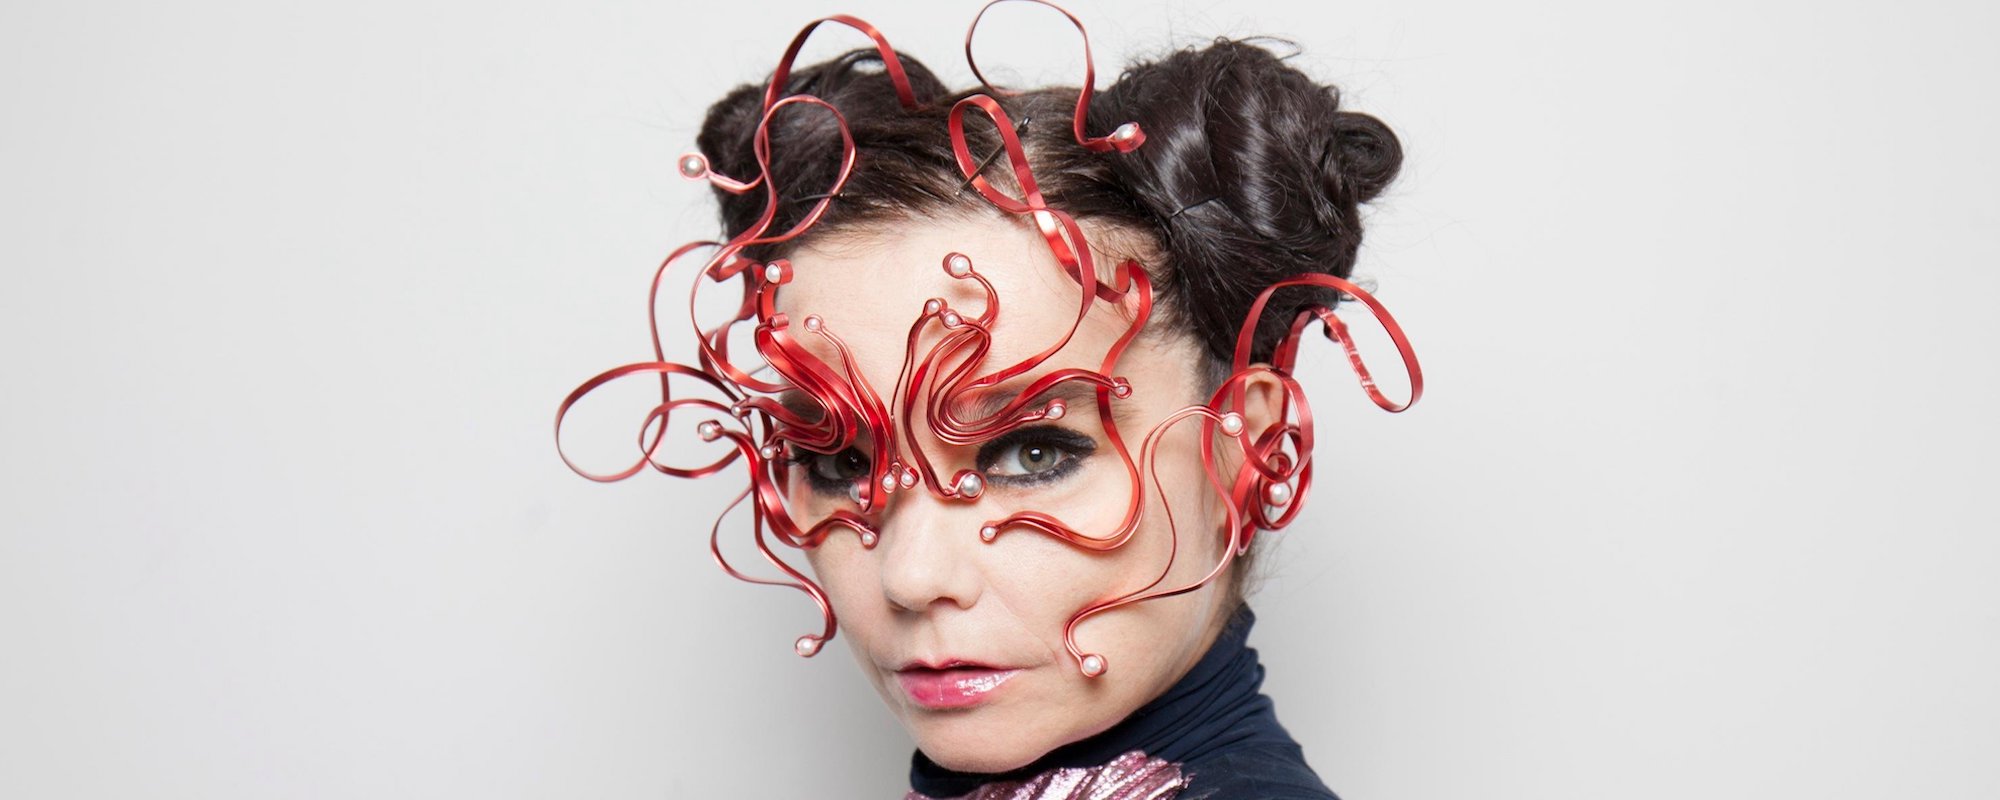 New Song Saturday! Hear New Tracks from Bjork, Molly Tuttle, Fantastic Negrito and More!